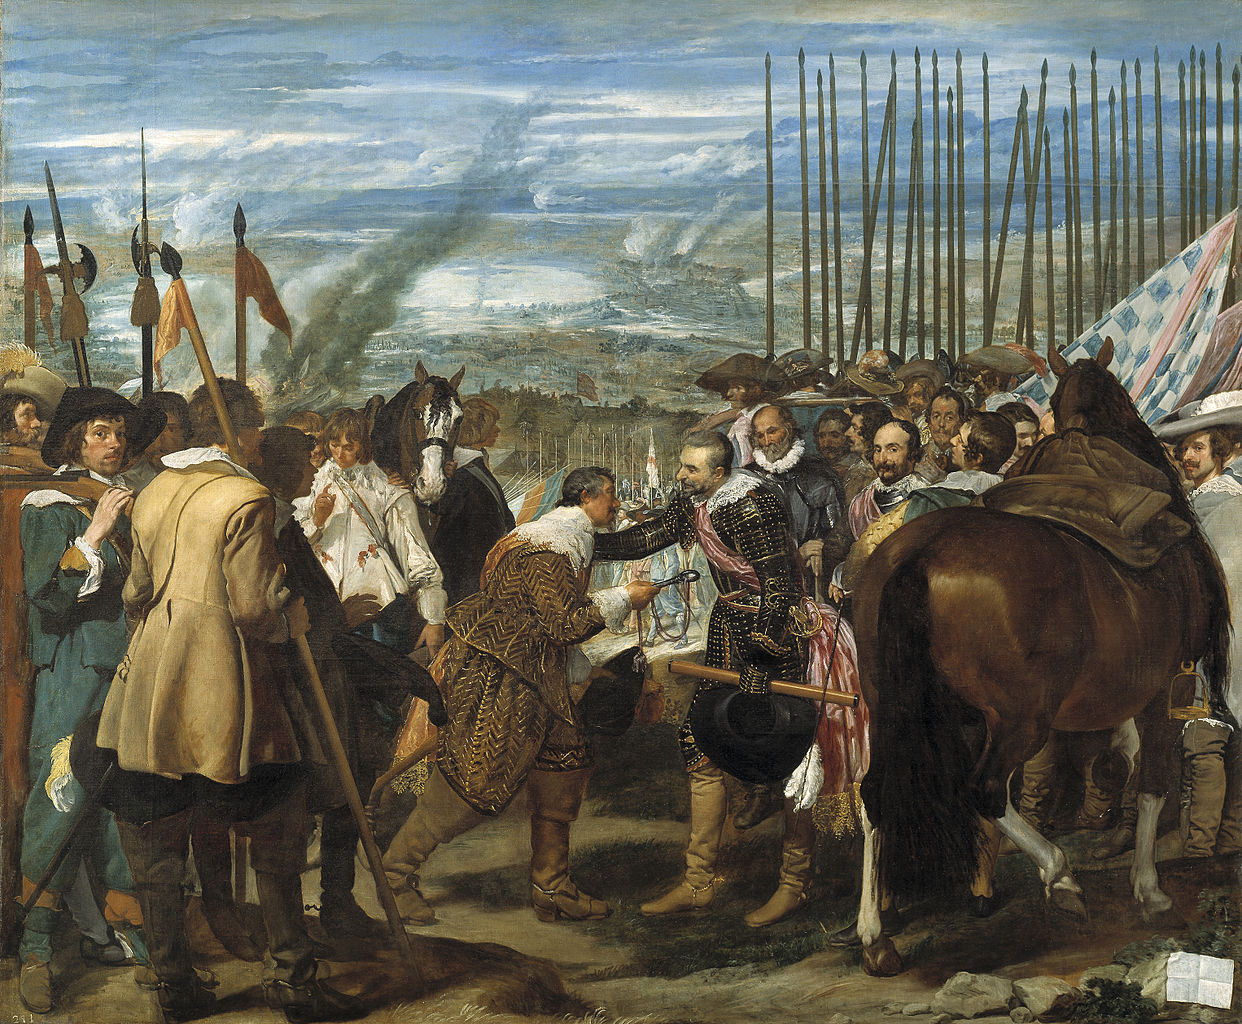 The Surrender of Breda by Diego Velázquez, 1635